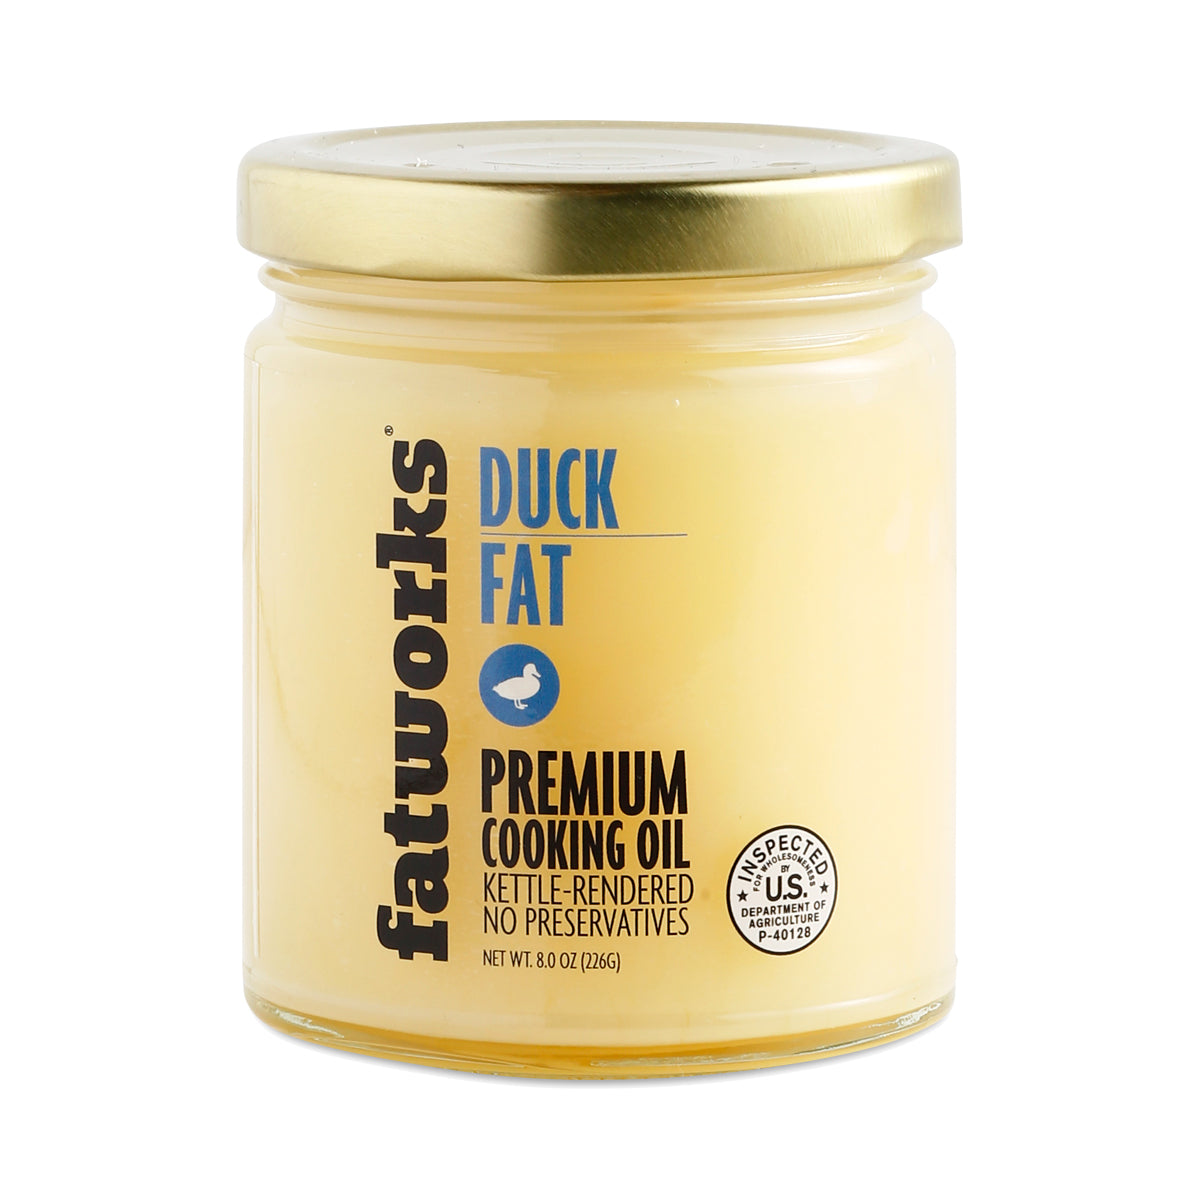 FATWORKS: Duck Fat Cage Free, 8 oz - Vending Business Solutions